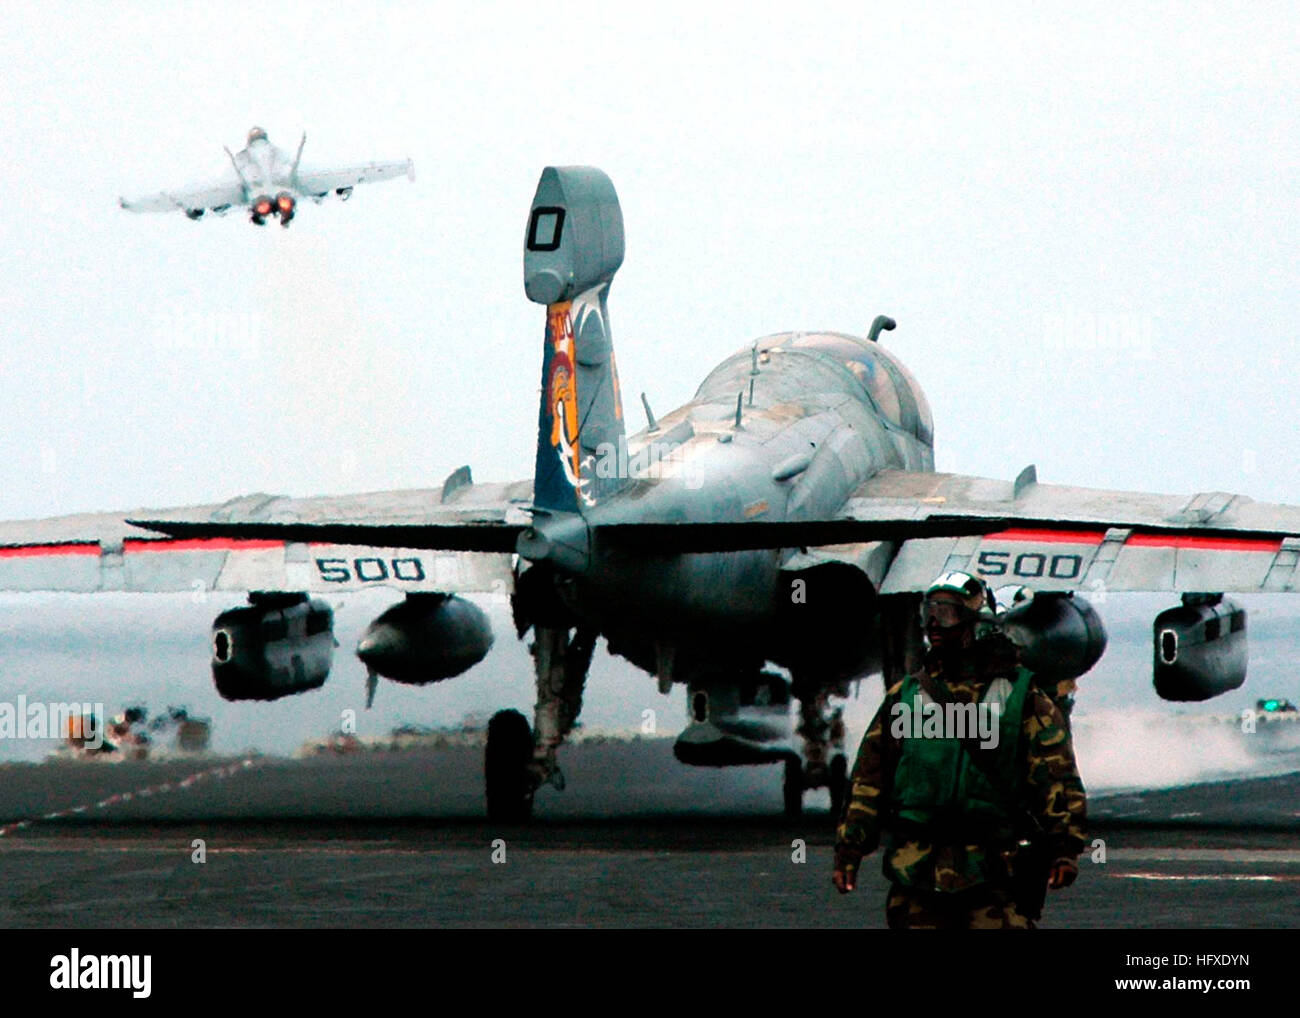 050919-N-5384B-088 Pacific Ocean (Sept. 19, 2005) - As a EA-6B Prowler, assigned to the ÒLancersÓ of Electronic attack Squadron One Three One (VAQ-131), prepares for take off, an F/A-18 Super Hornet launches from the waist catapult of the Nimitz-class aircraft carrier USS Abraham Lincoln (CVN 72). Lincoln and embarked Carrier Air Wing Two (CVW-2) are currently conducting Quarterly Surge Sustainment Training off the coast of Southern California. U.S. Navy photo by Photographer's Mate Airman Justin R. Blake (RELEASED) US Navy 050919-N-5384B-088 As a EA-6B Prowler, assigned to the Lancers of Elec Stock Photo